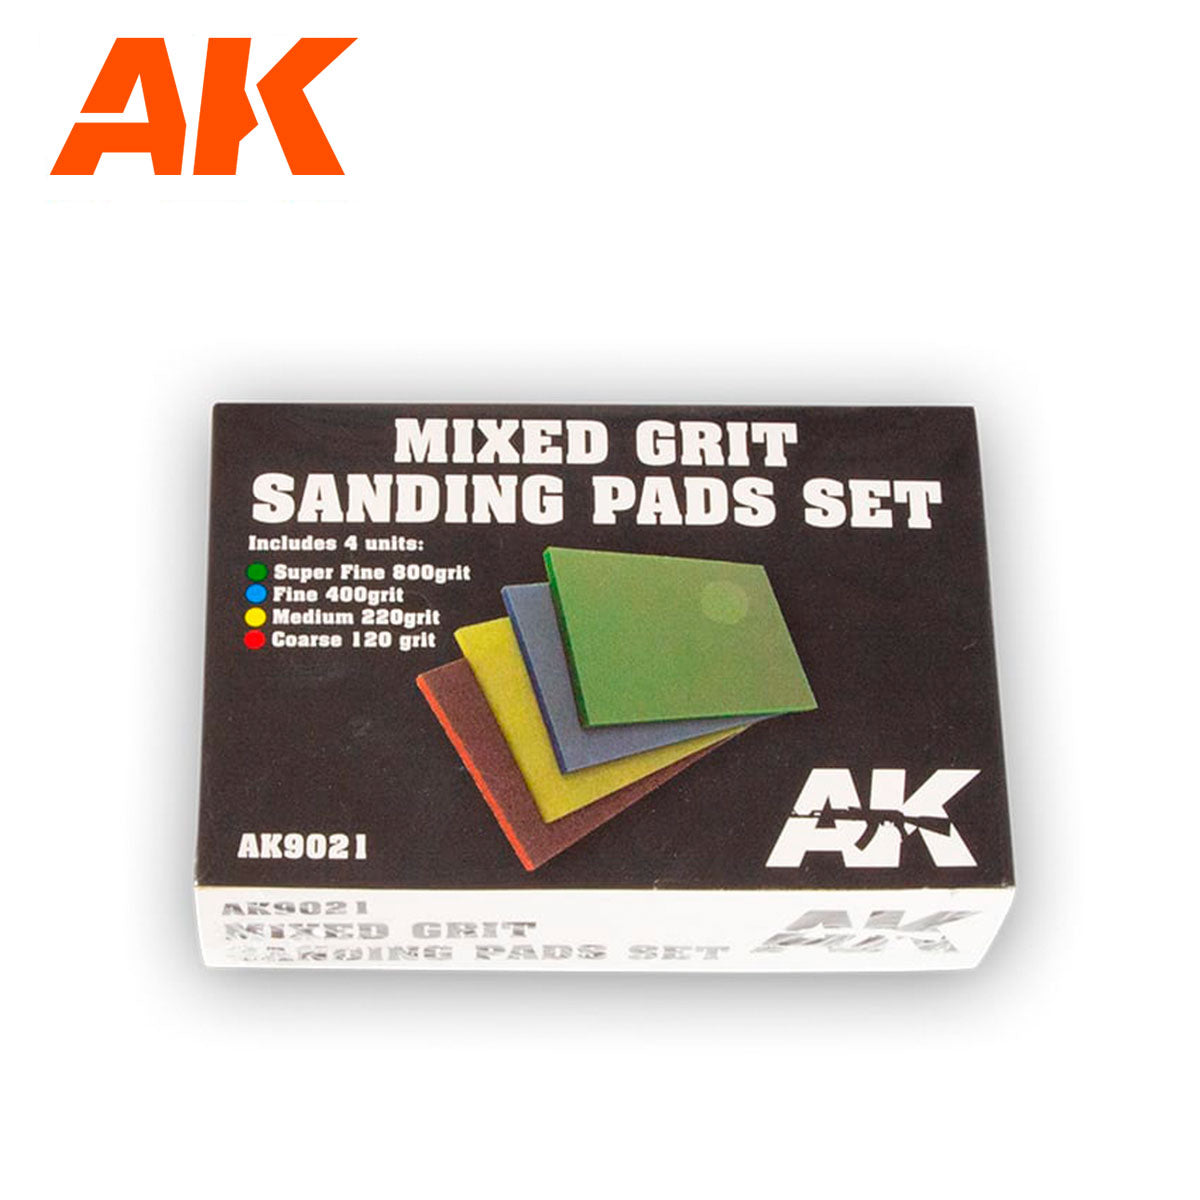 AK9021 - Mixed Grit Sanding Pads - 800 grit (4 in a pack)